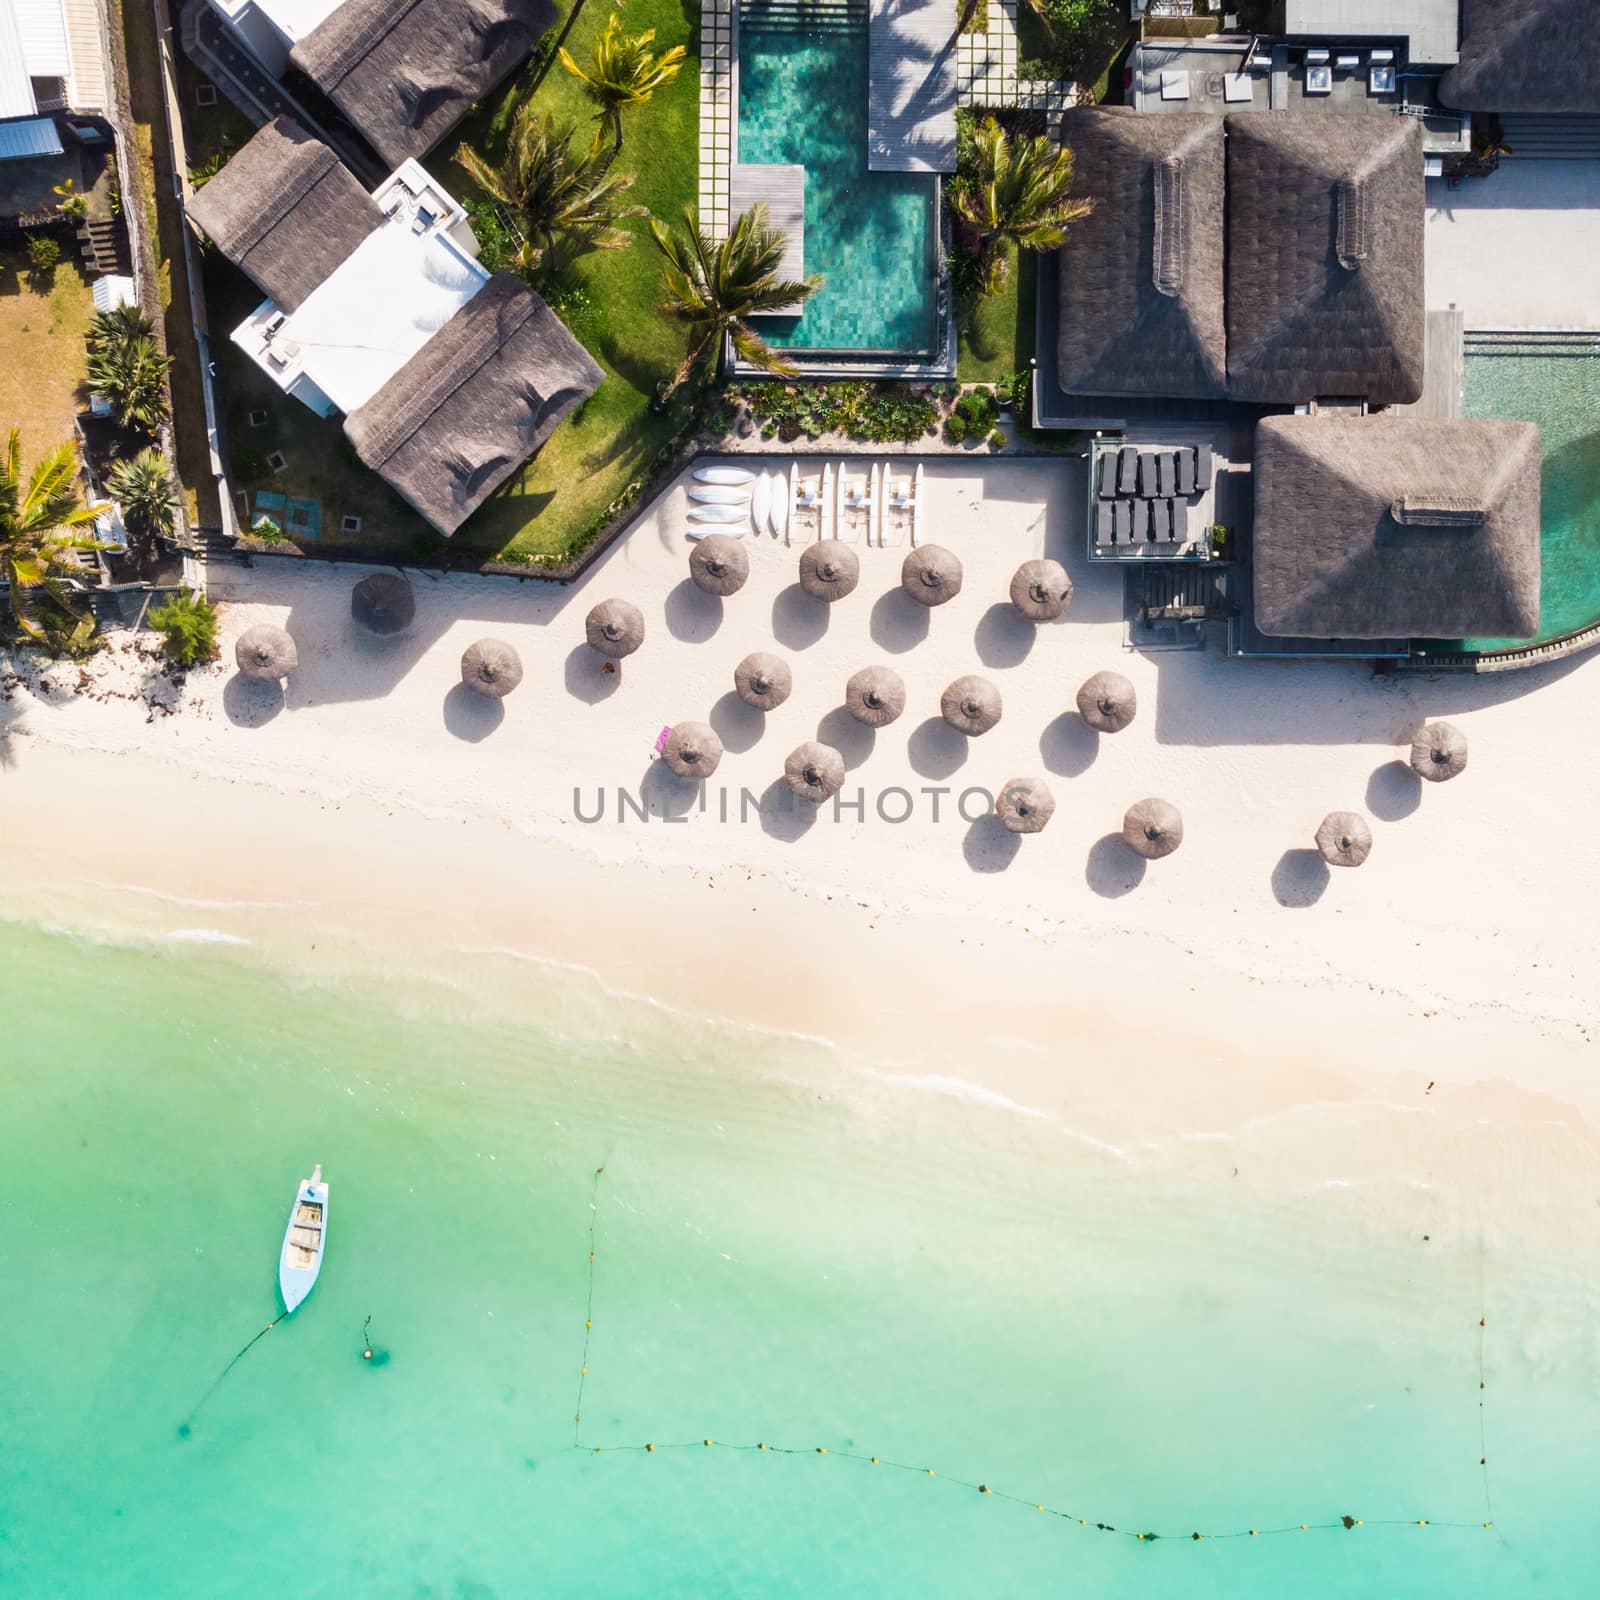 Aerial view of beautiful tropical beach front hotel resort with swimming pool, palm leaves umbrellas and turquoise sea. Paradise destination for vacations in Mauritius.